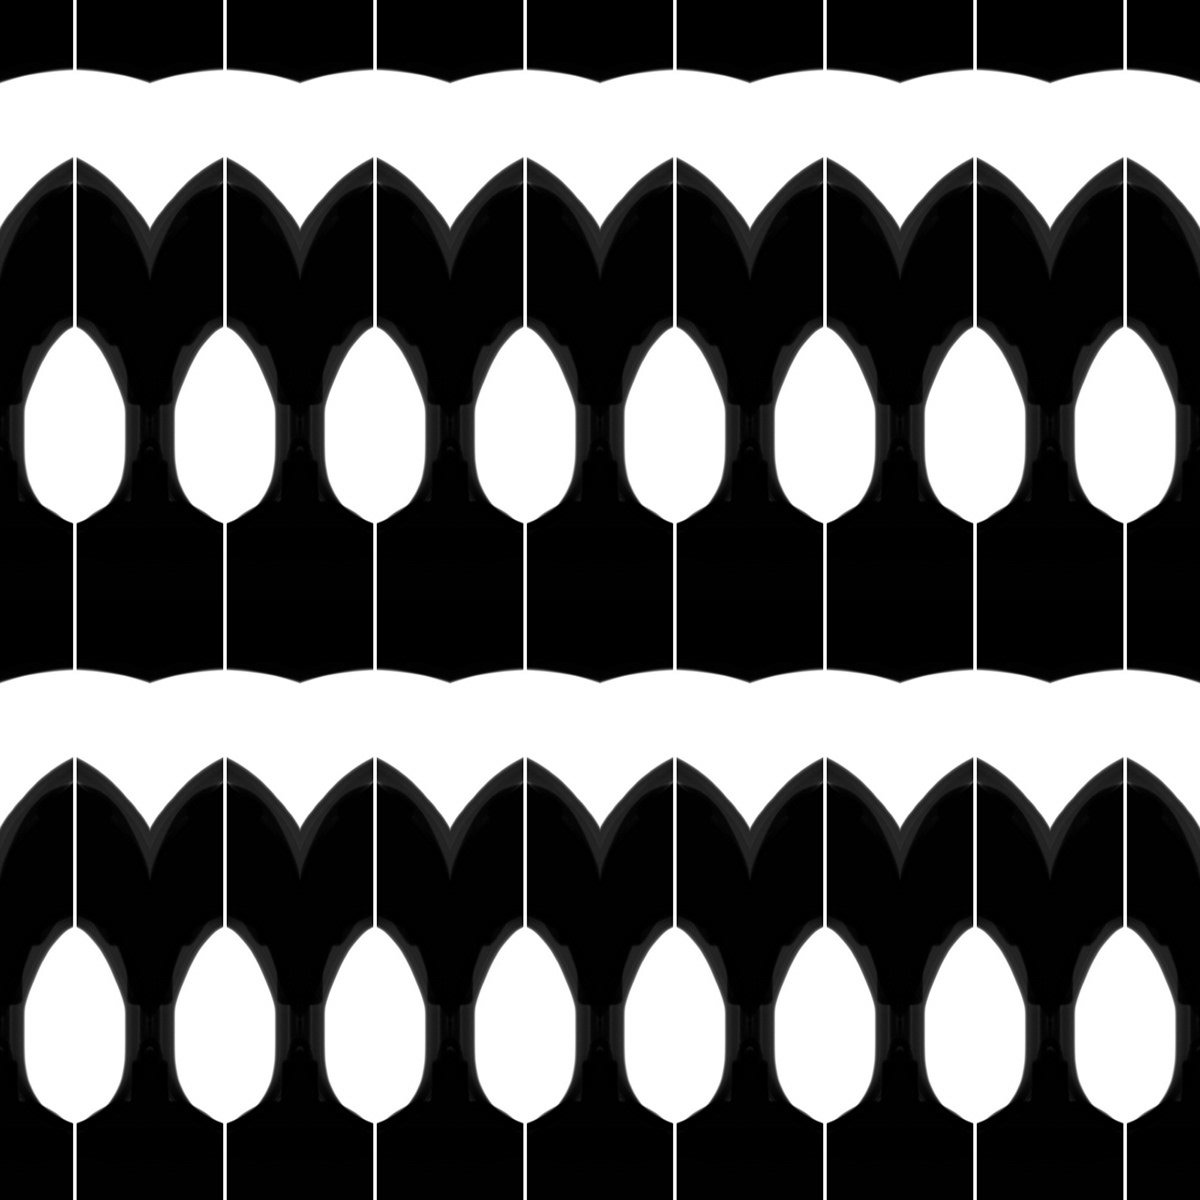 Tents in Space Patterns digital painting black White